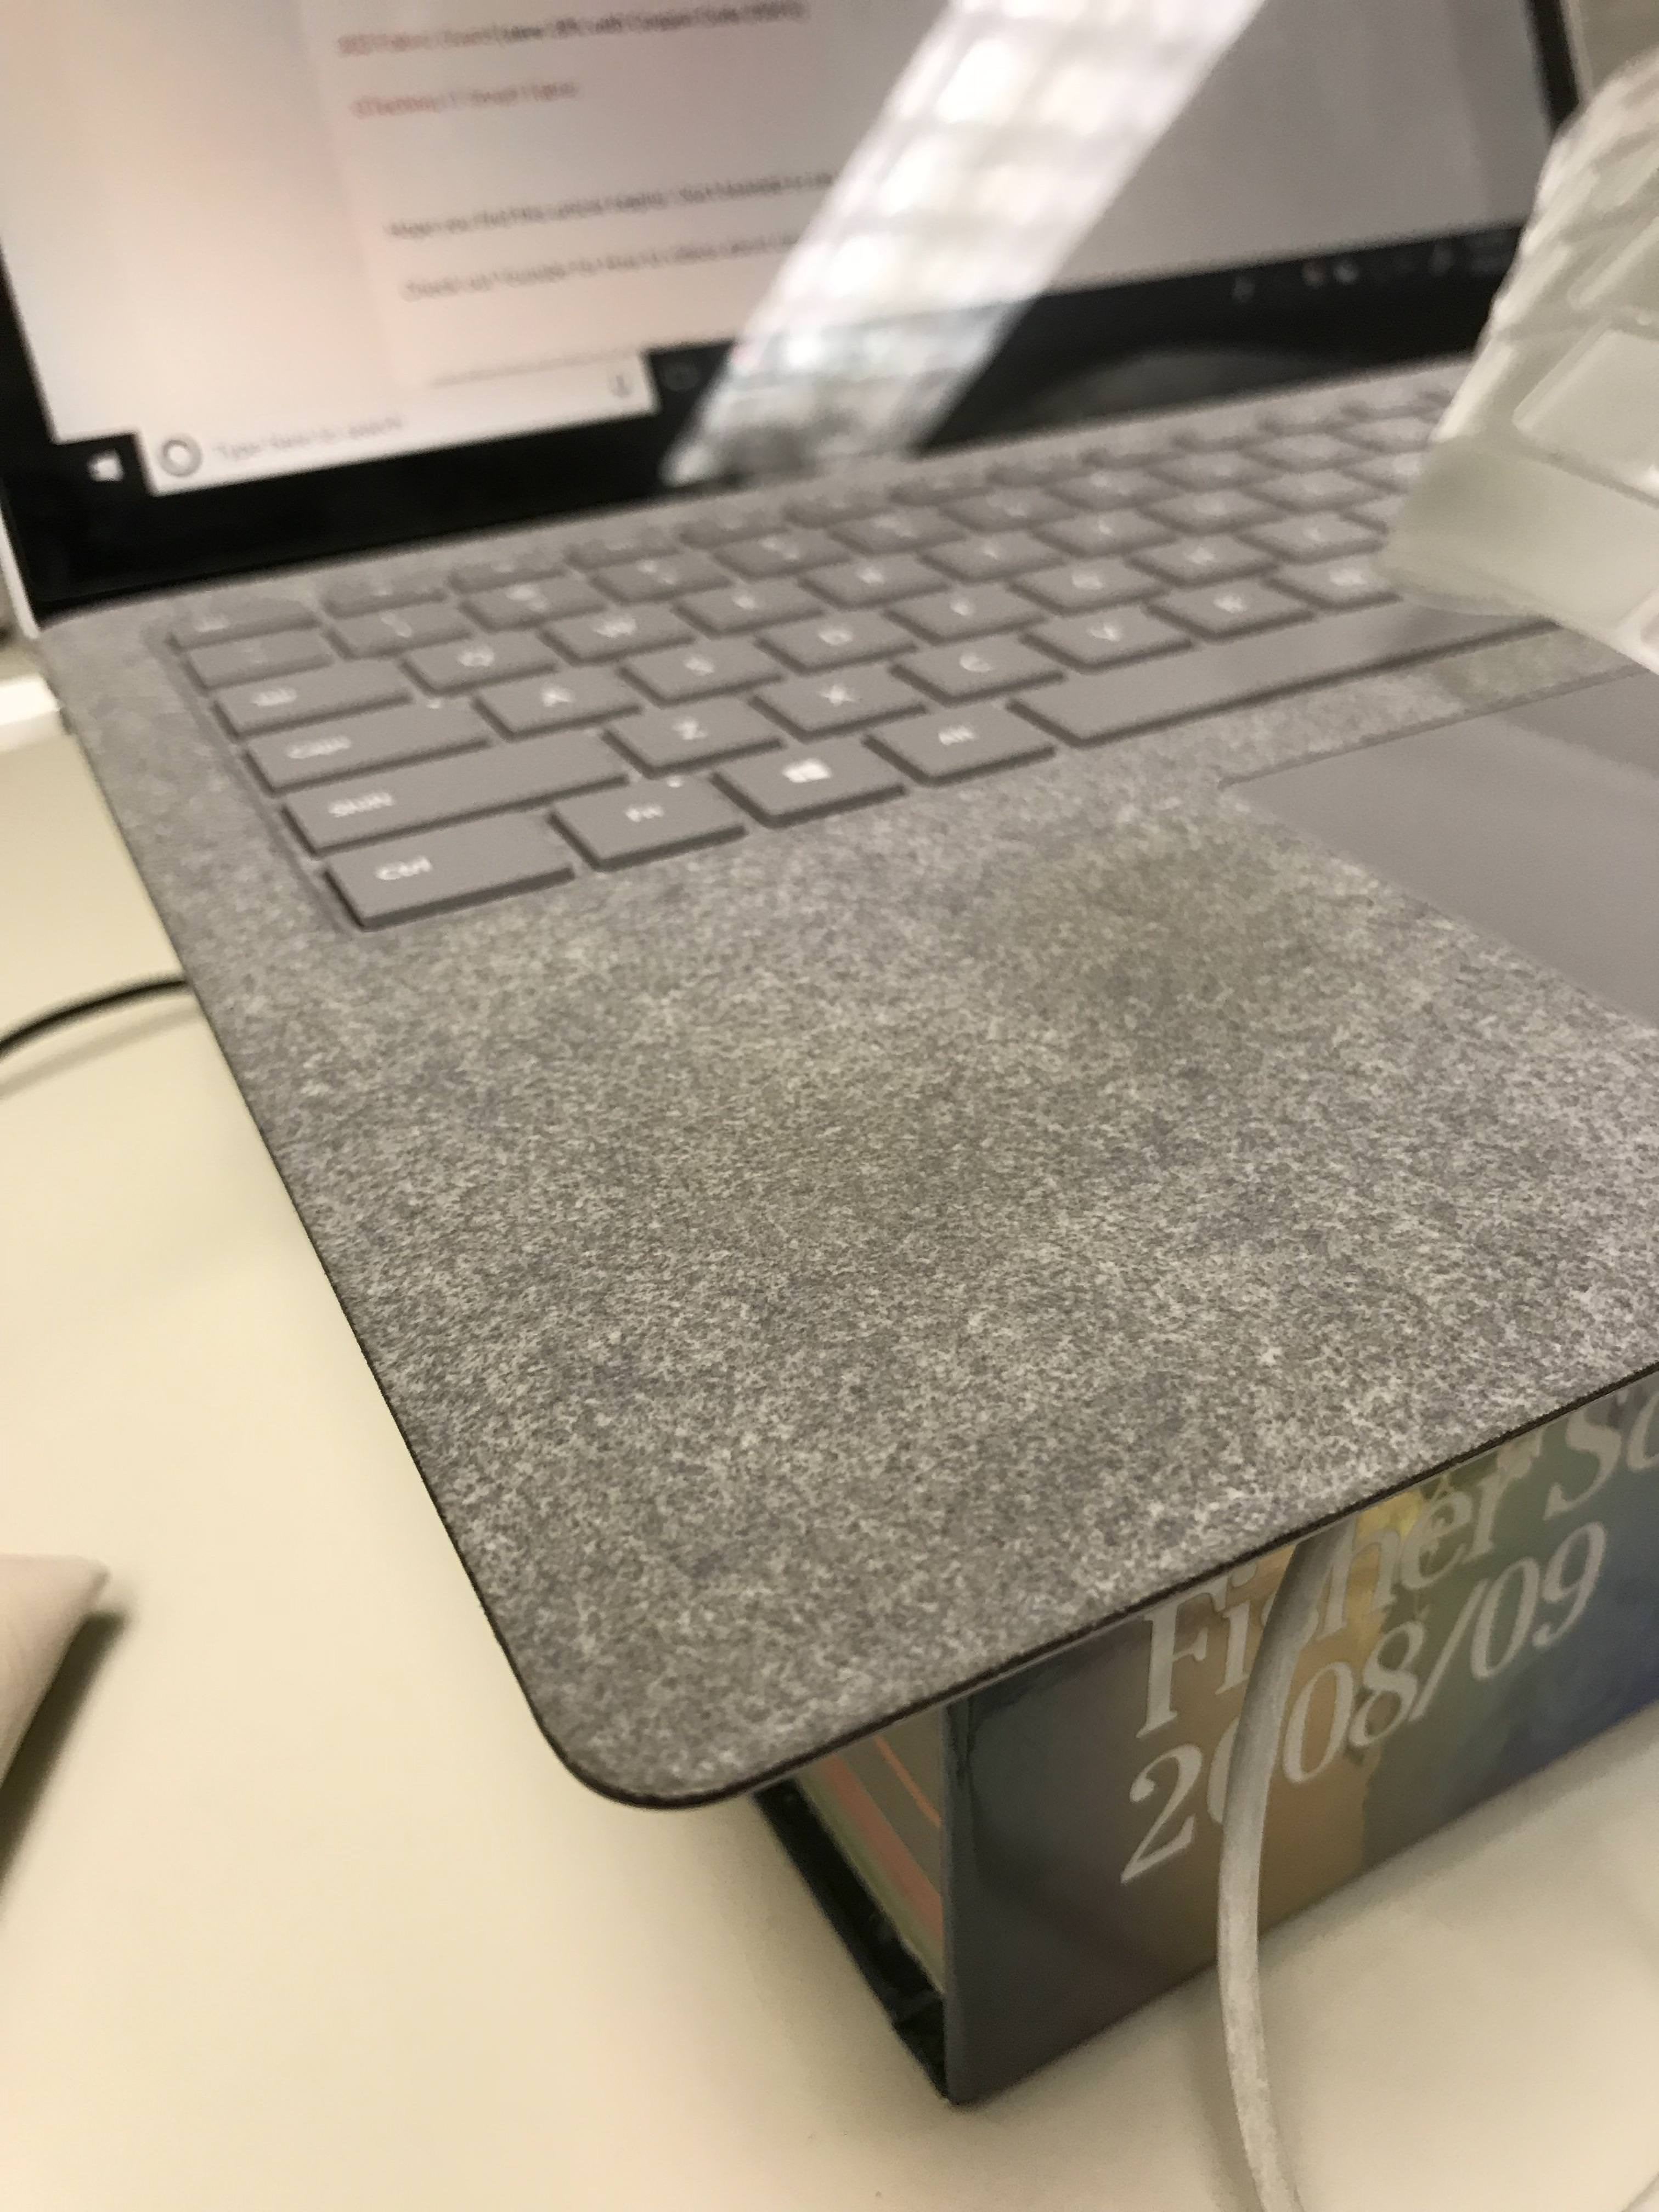 Windows Surface Keyboard Crumble Shrink so Ugly at the Edge